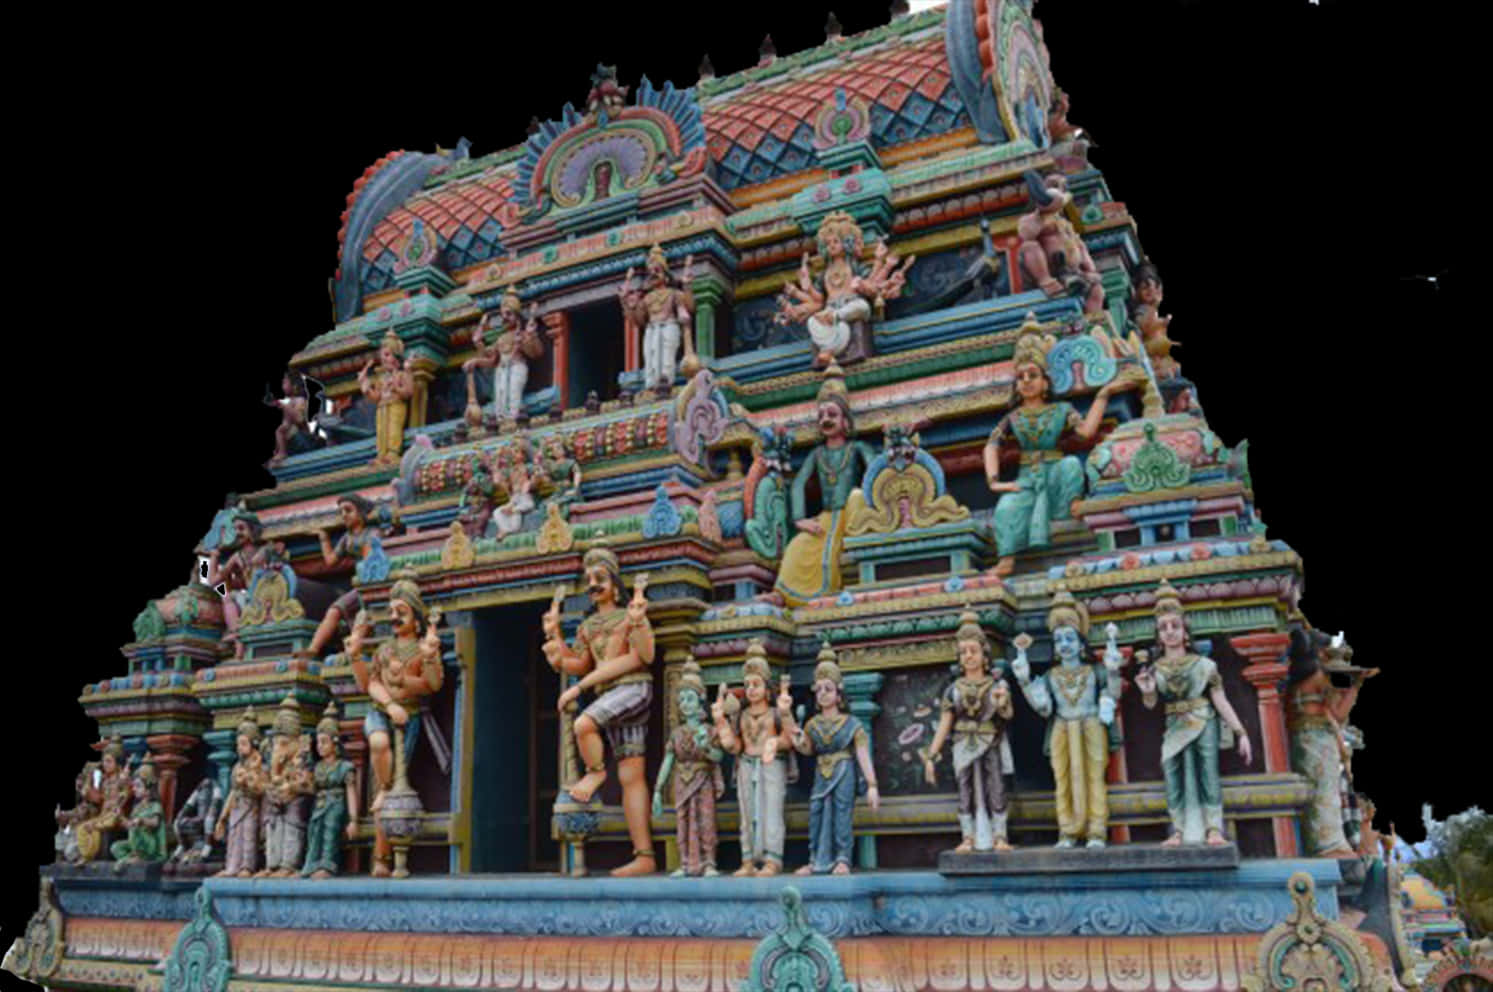 A Colorful Temple With Statues